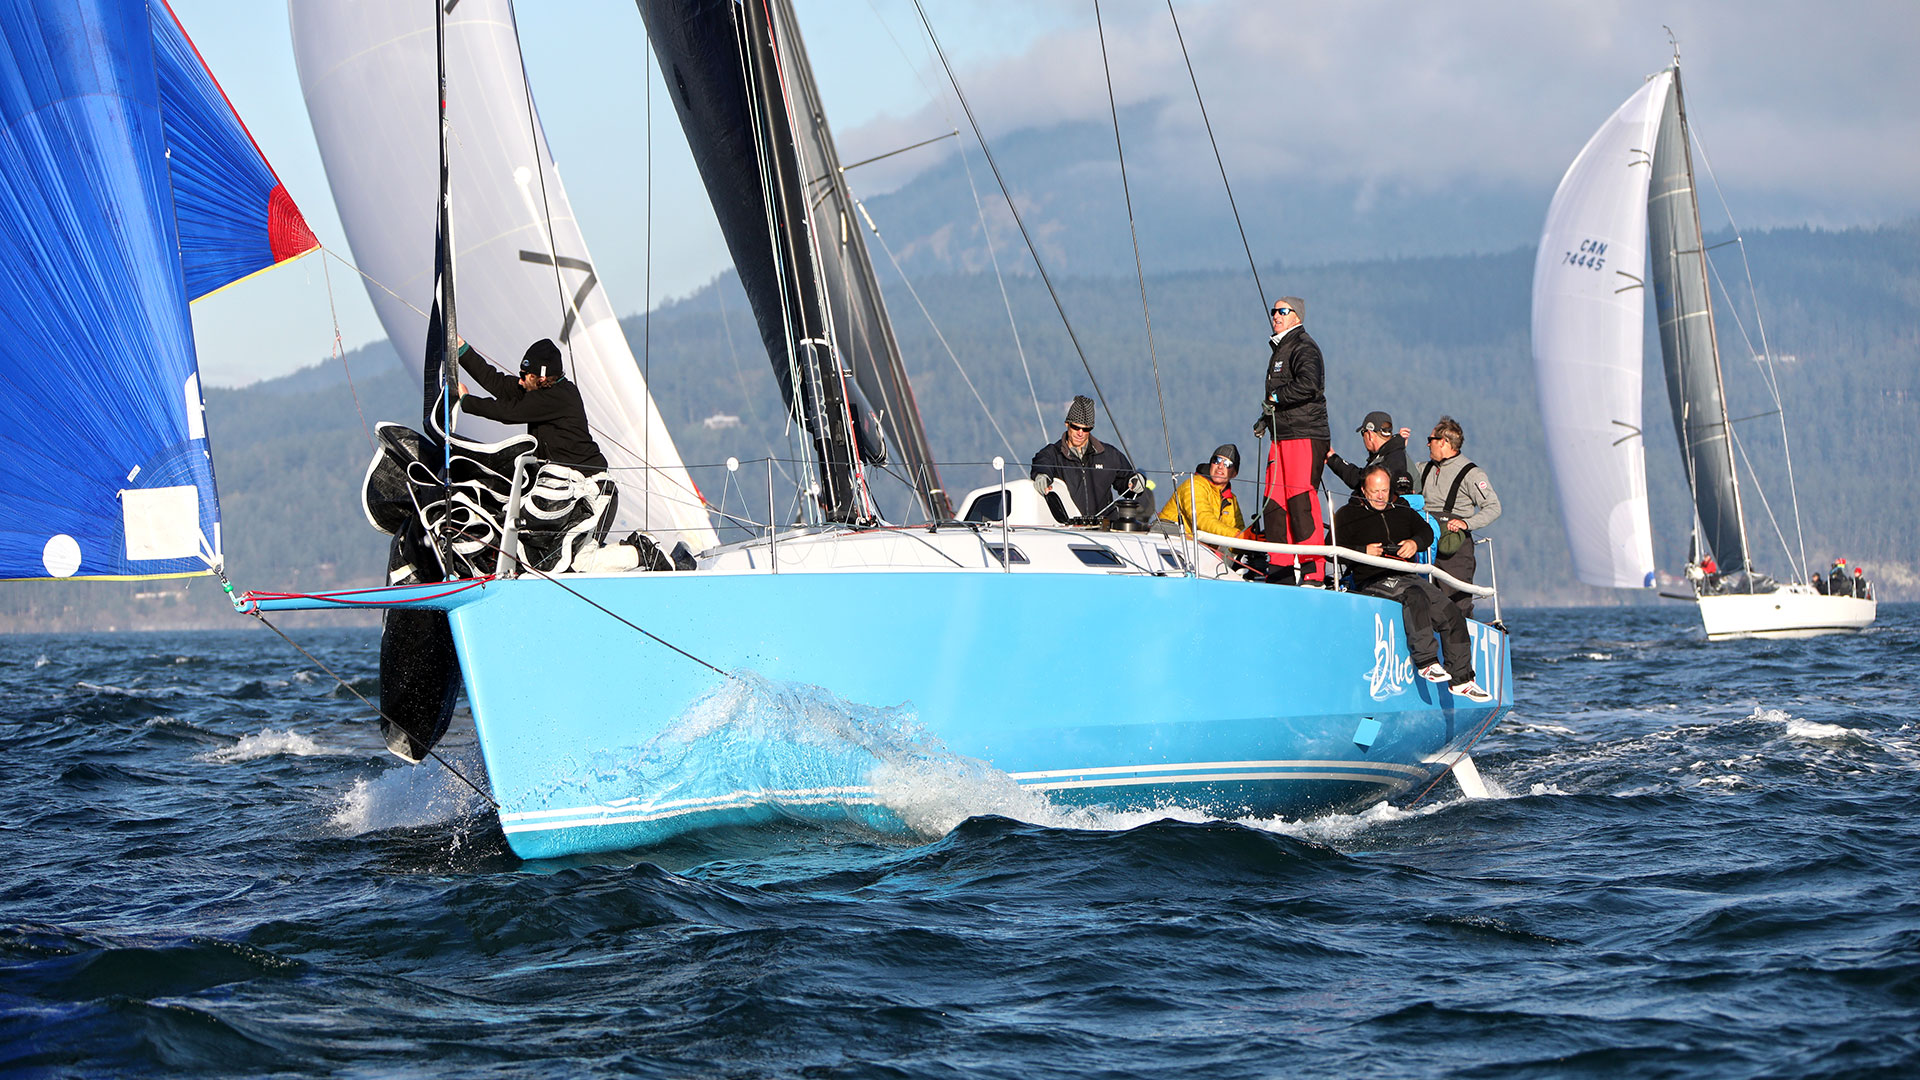 Riptide 41, Blue is headed for Hawaii